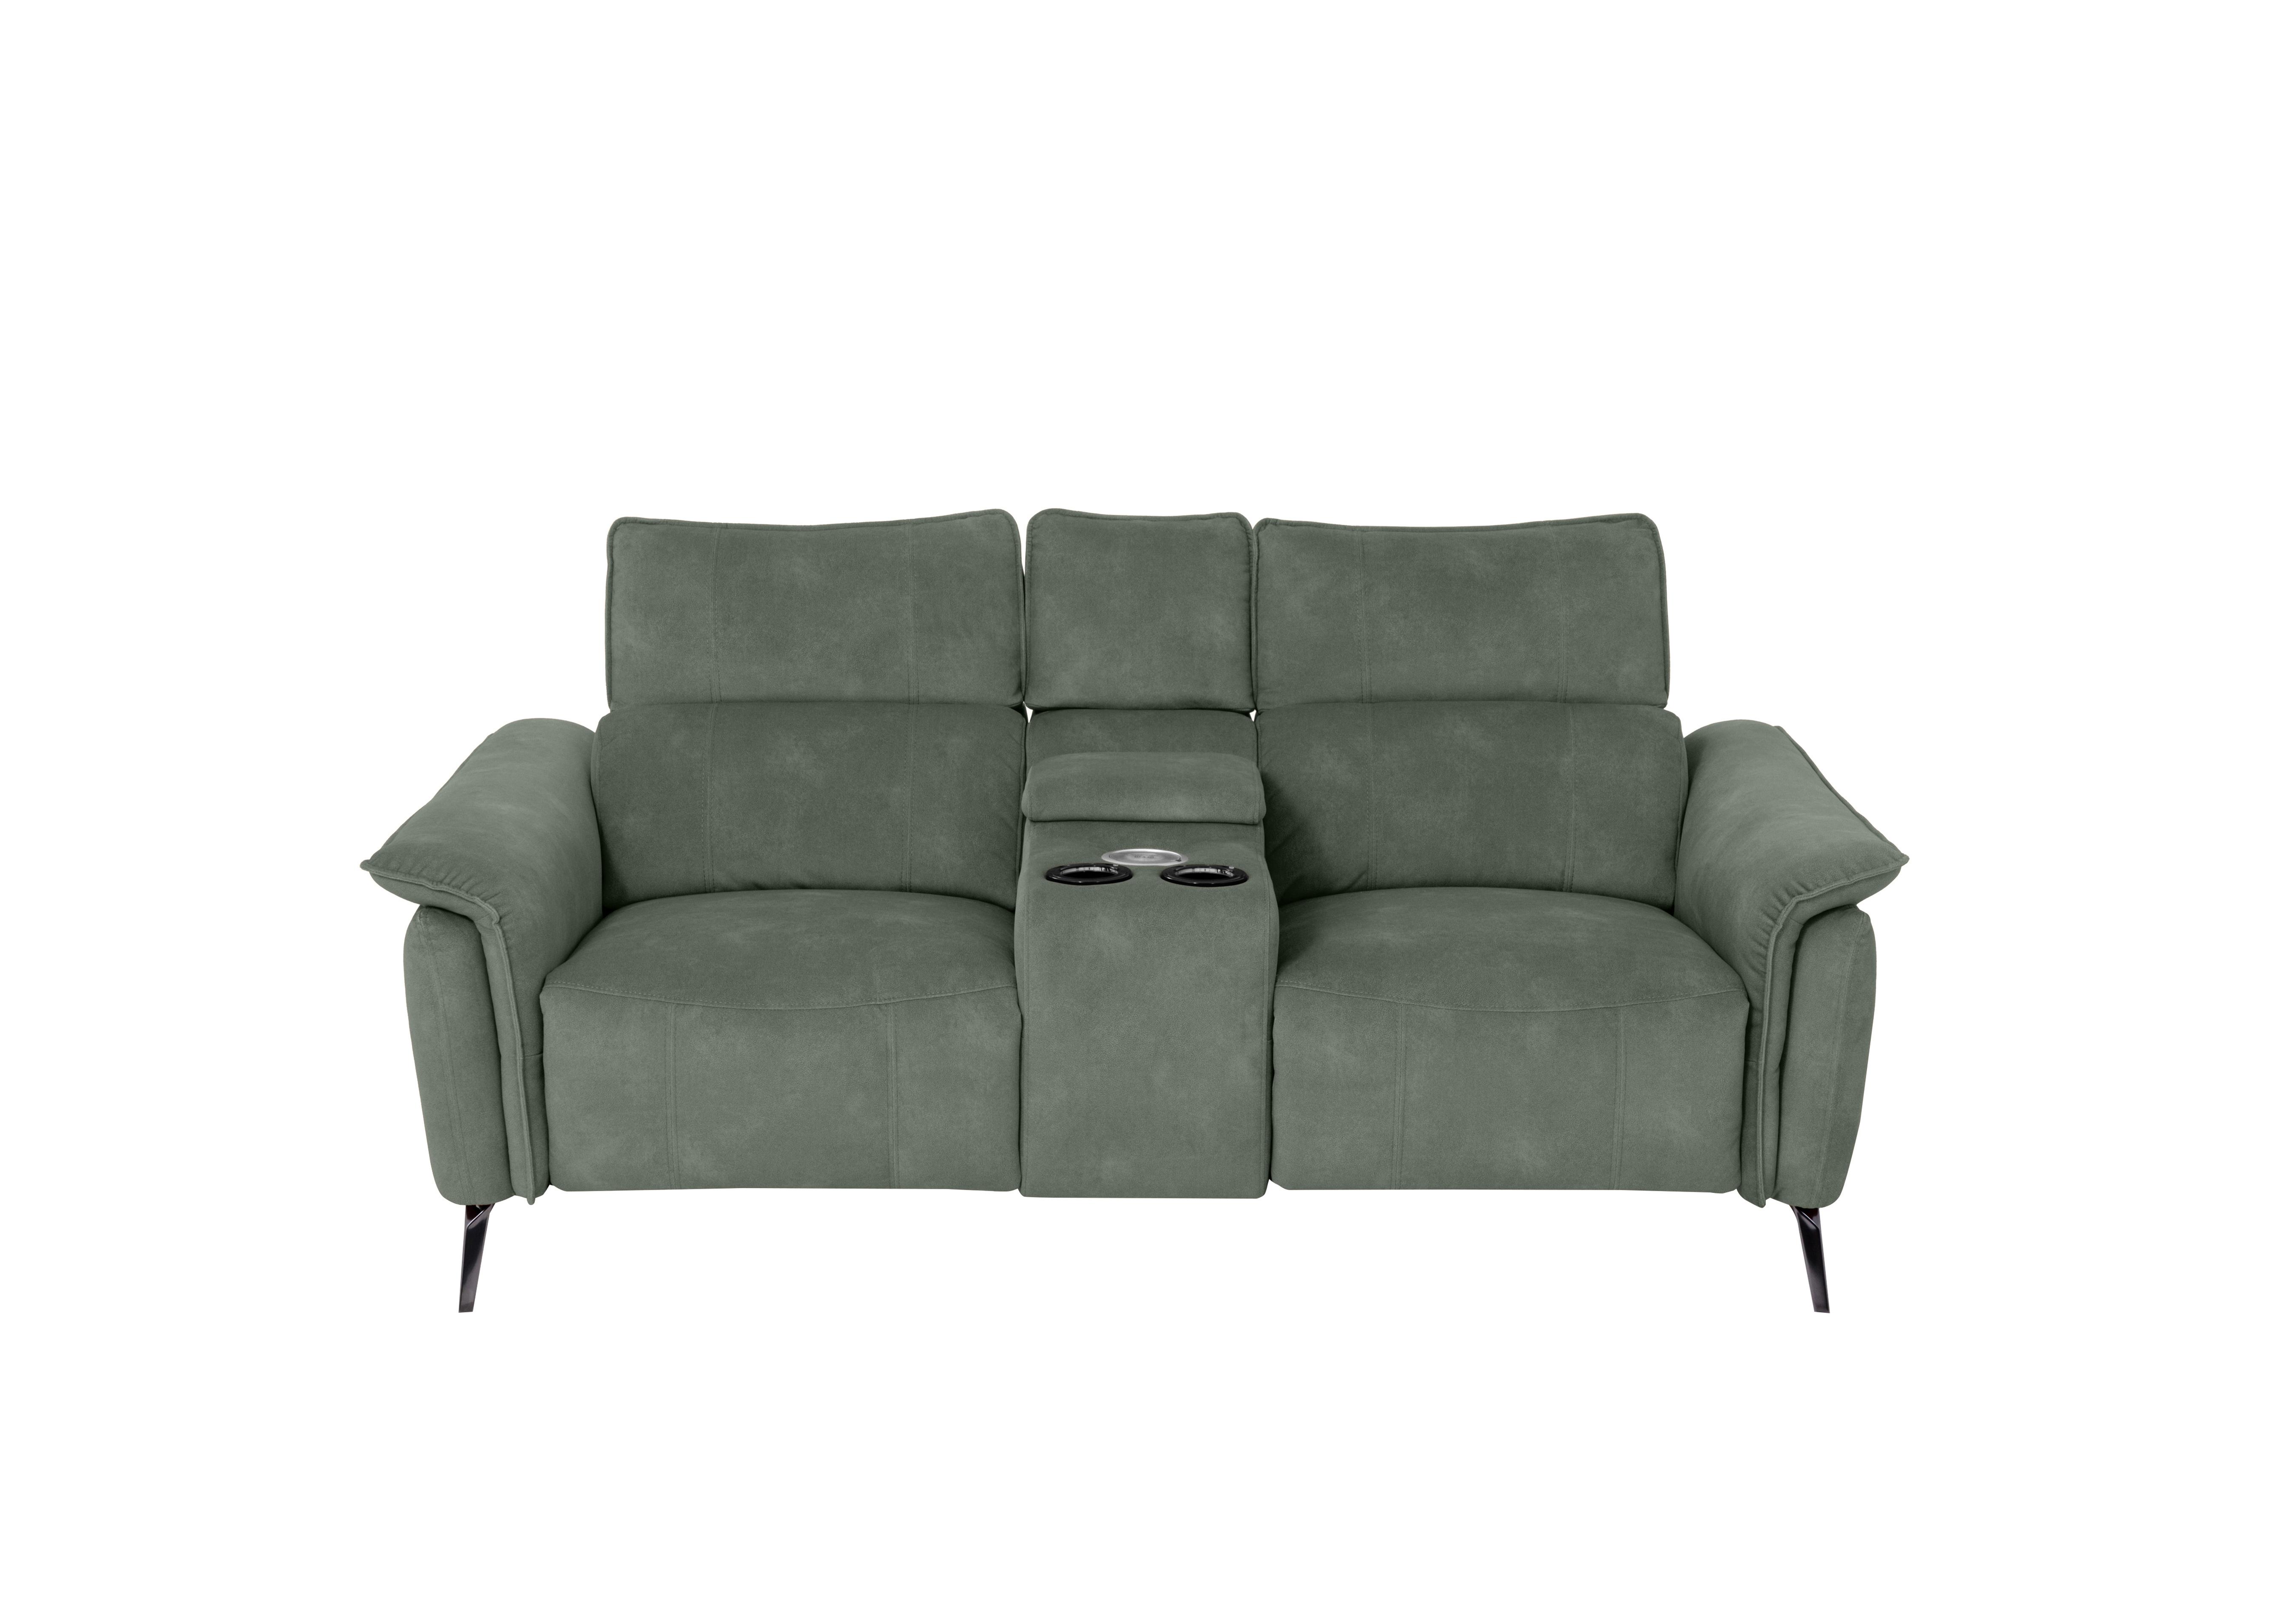 Jude 2 Seater Fabric Power Recliner Sofa with Smart Console Unit and Power Telescopic Headrests in Fern Dexter 14 43514 on Furniture Village